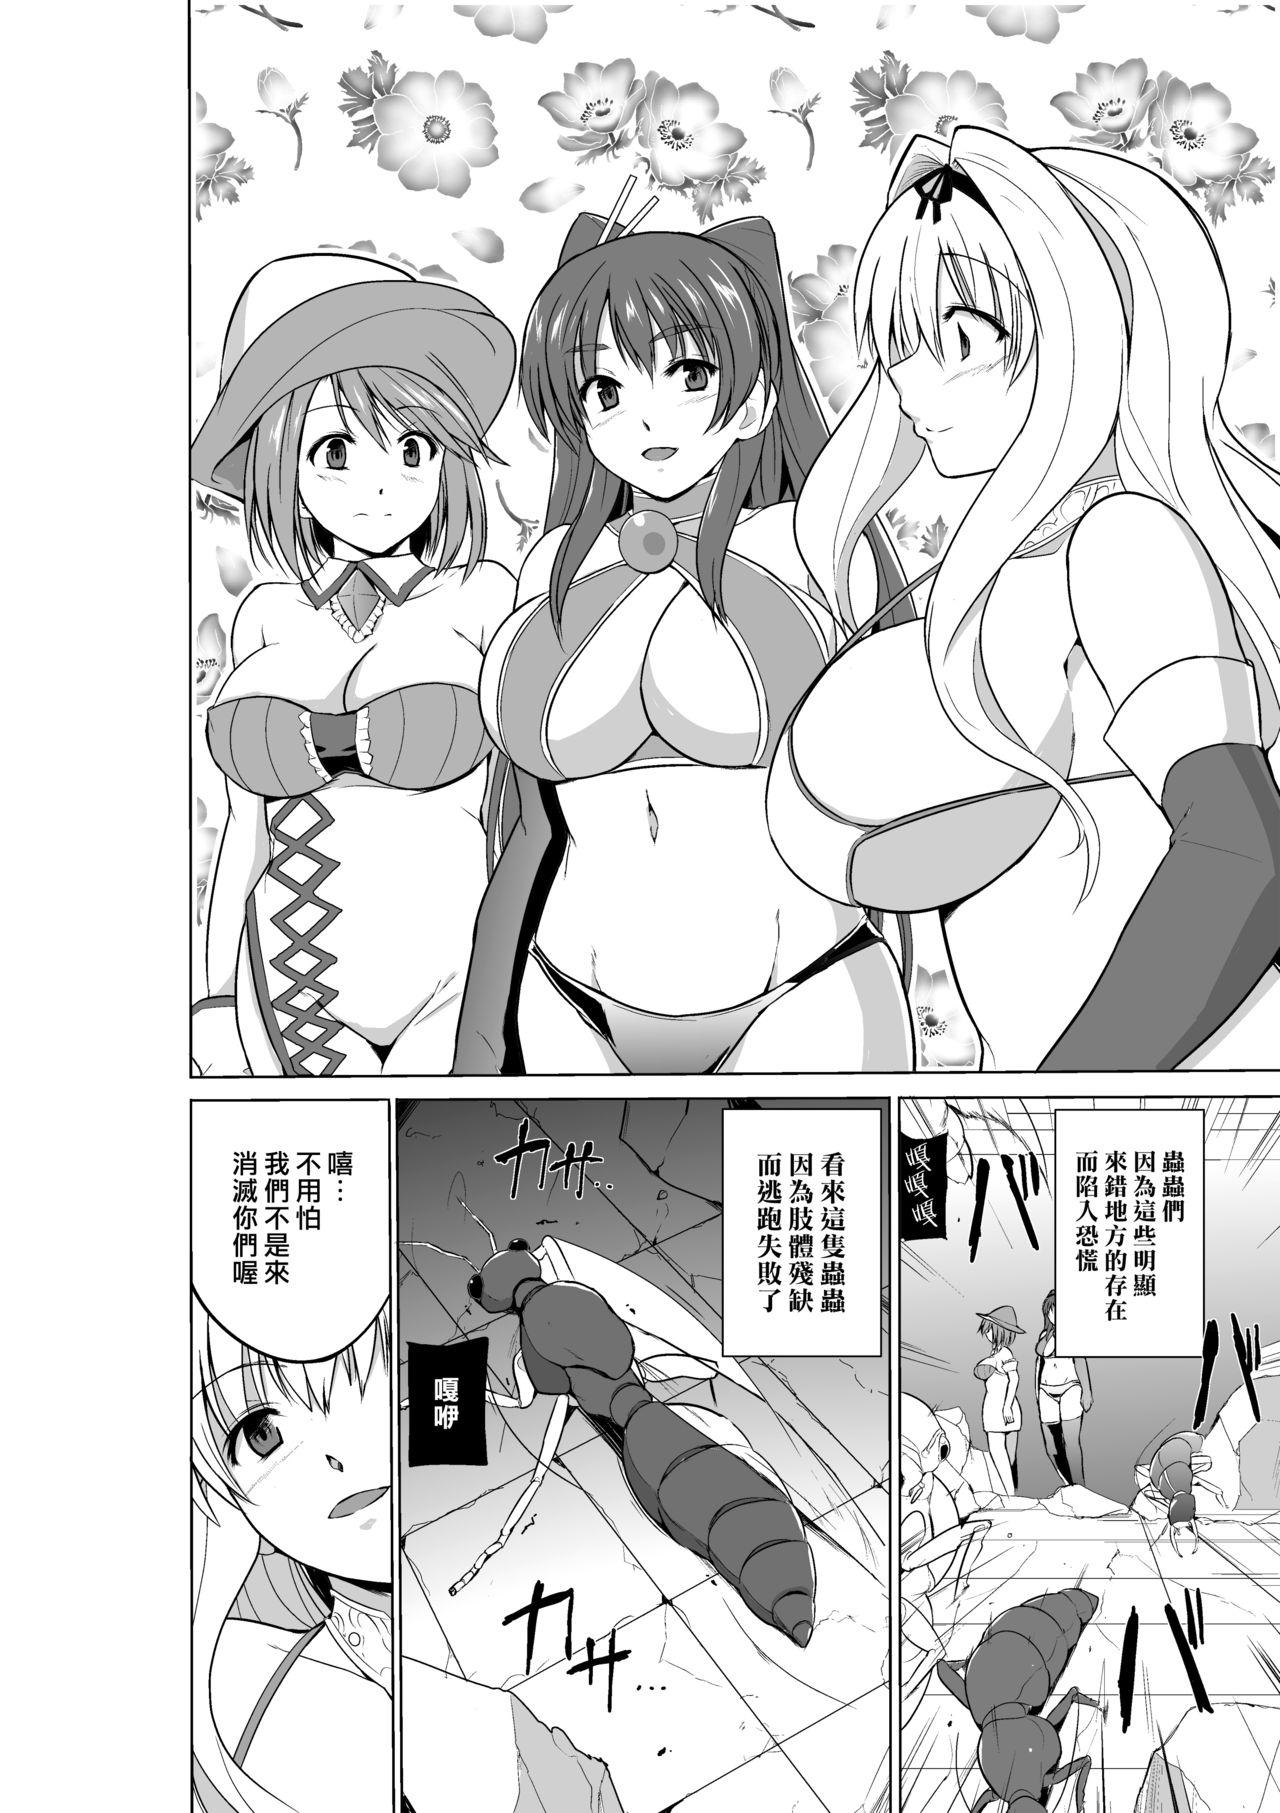 Doggystyle Porn Dungeon Travelers Minna no Oyuugi - Toheart2 Cop - Page 2